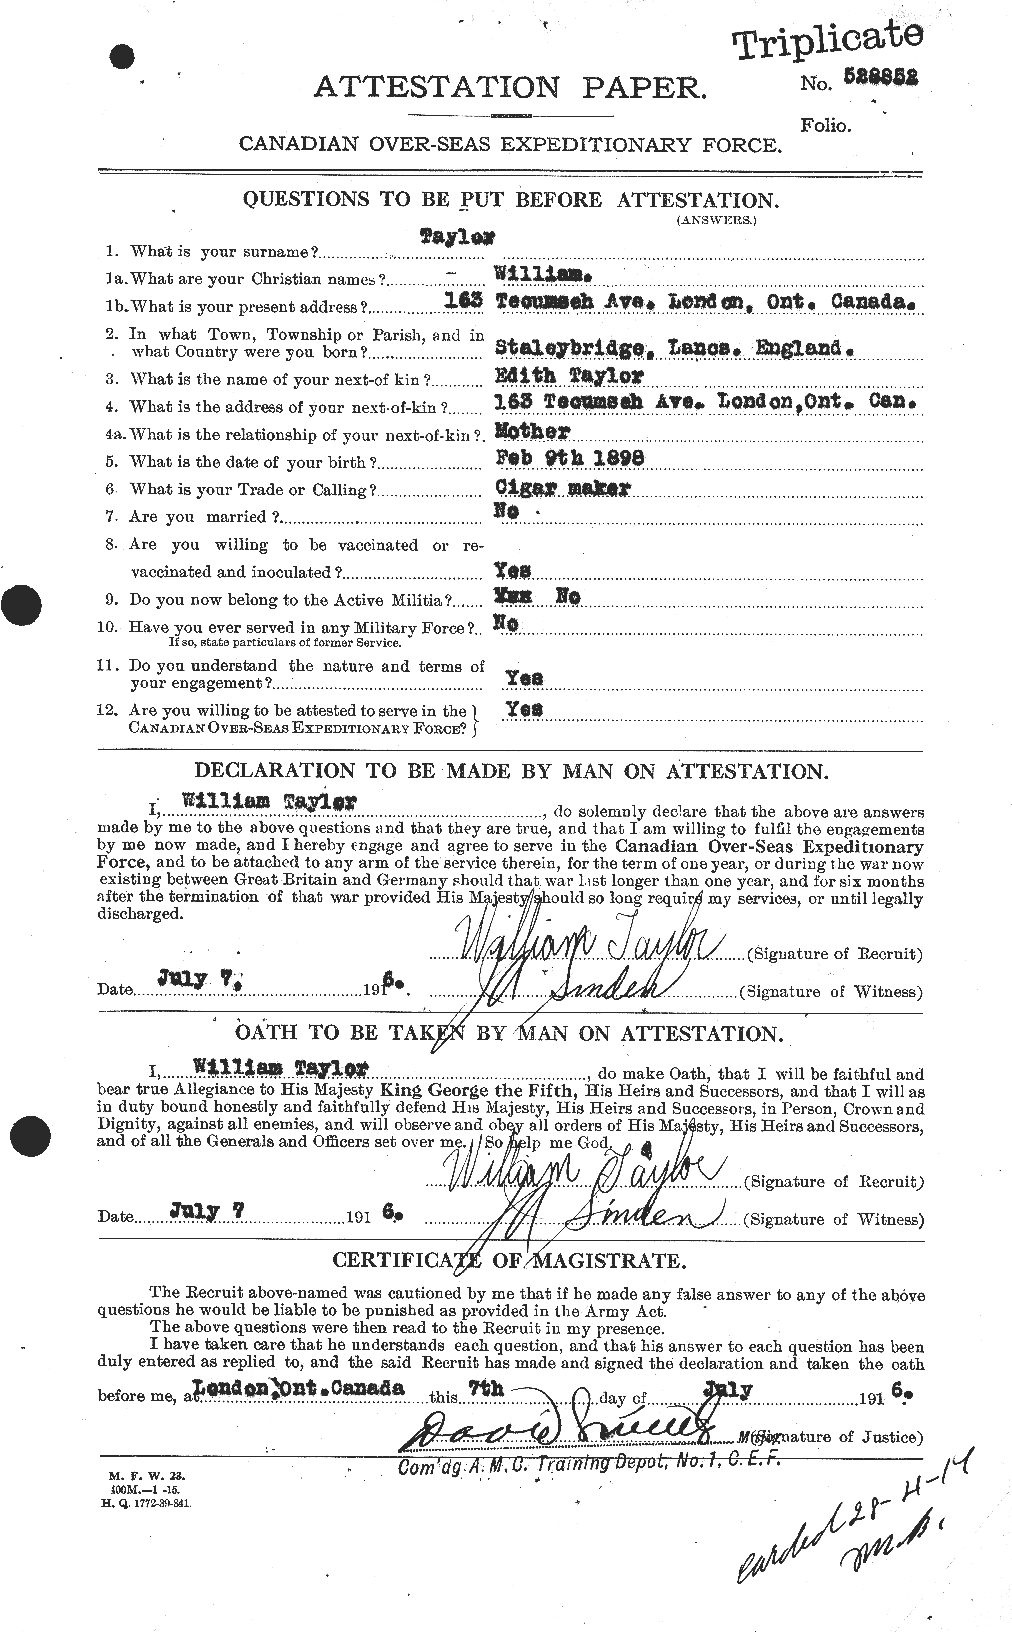 Personnel Records of the First World War - CEF 628117a